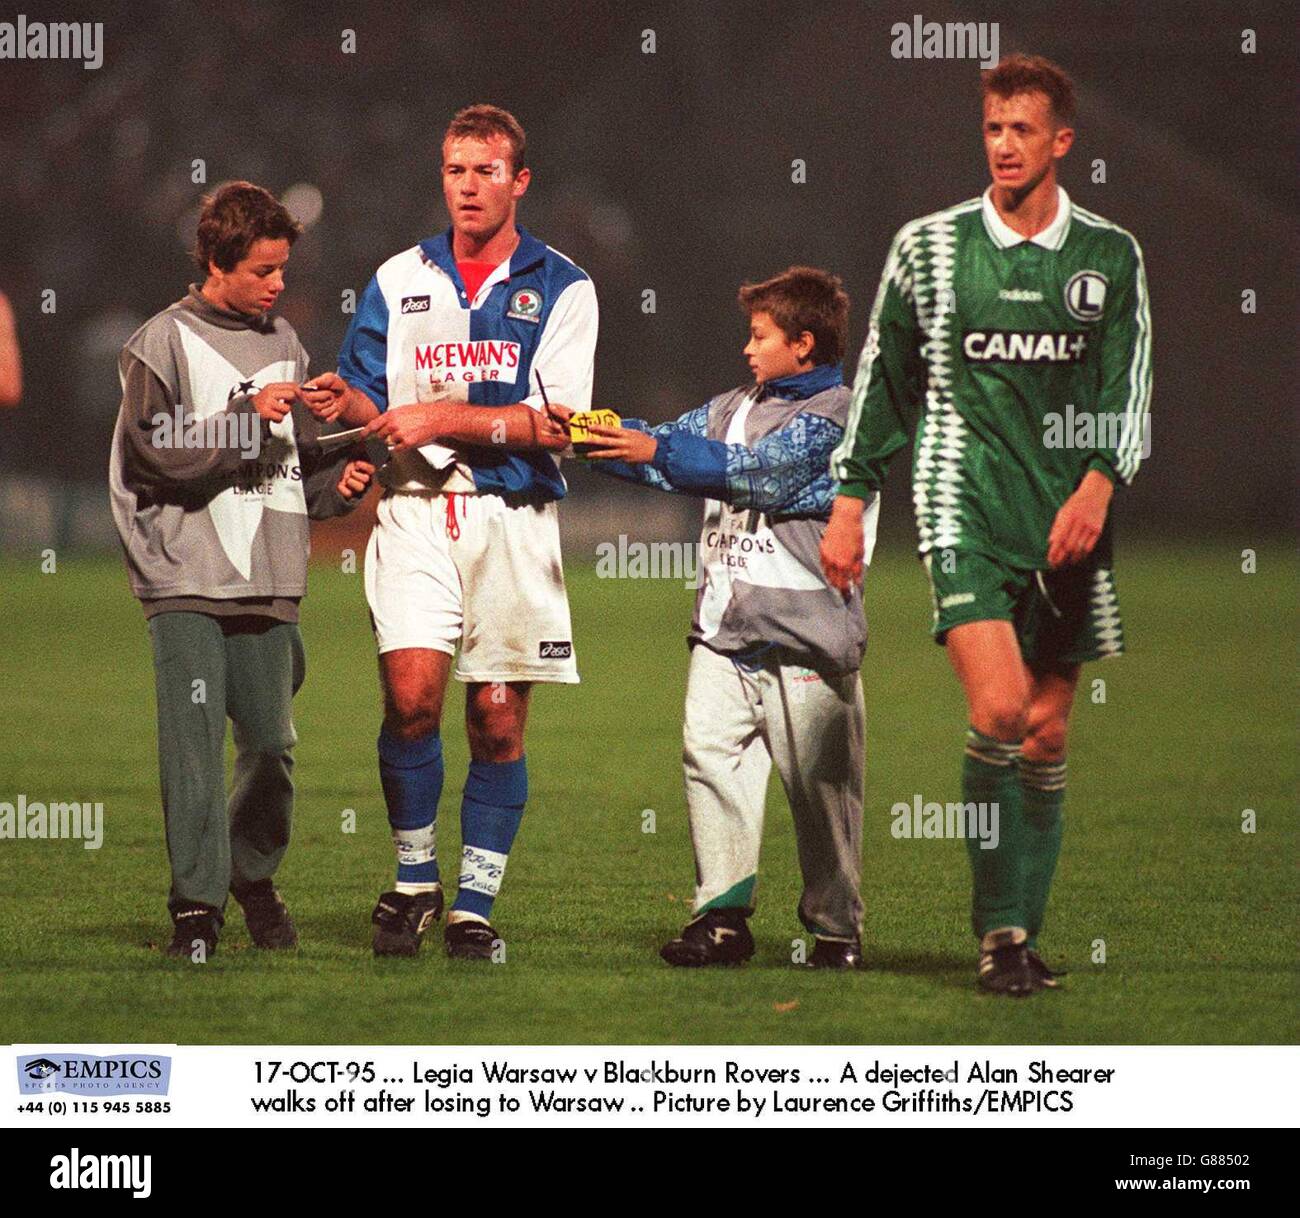 17-OCT-95, Legia Warsaw v Blackburn Rovers, A dejected Alan Shearer walks off after losing to Warsaw .. Picture by Laurence Griffiths/EMPICS Stock Photo